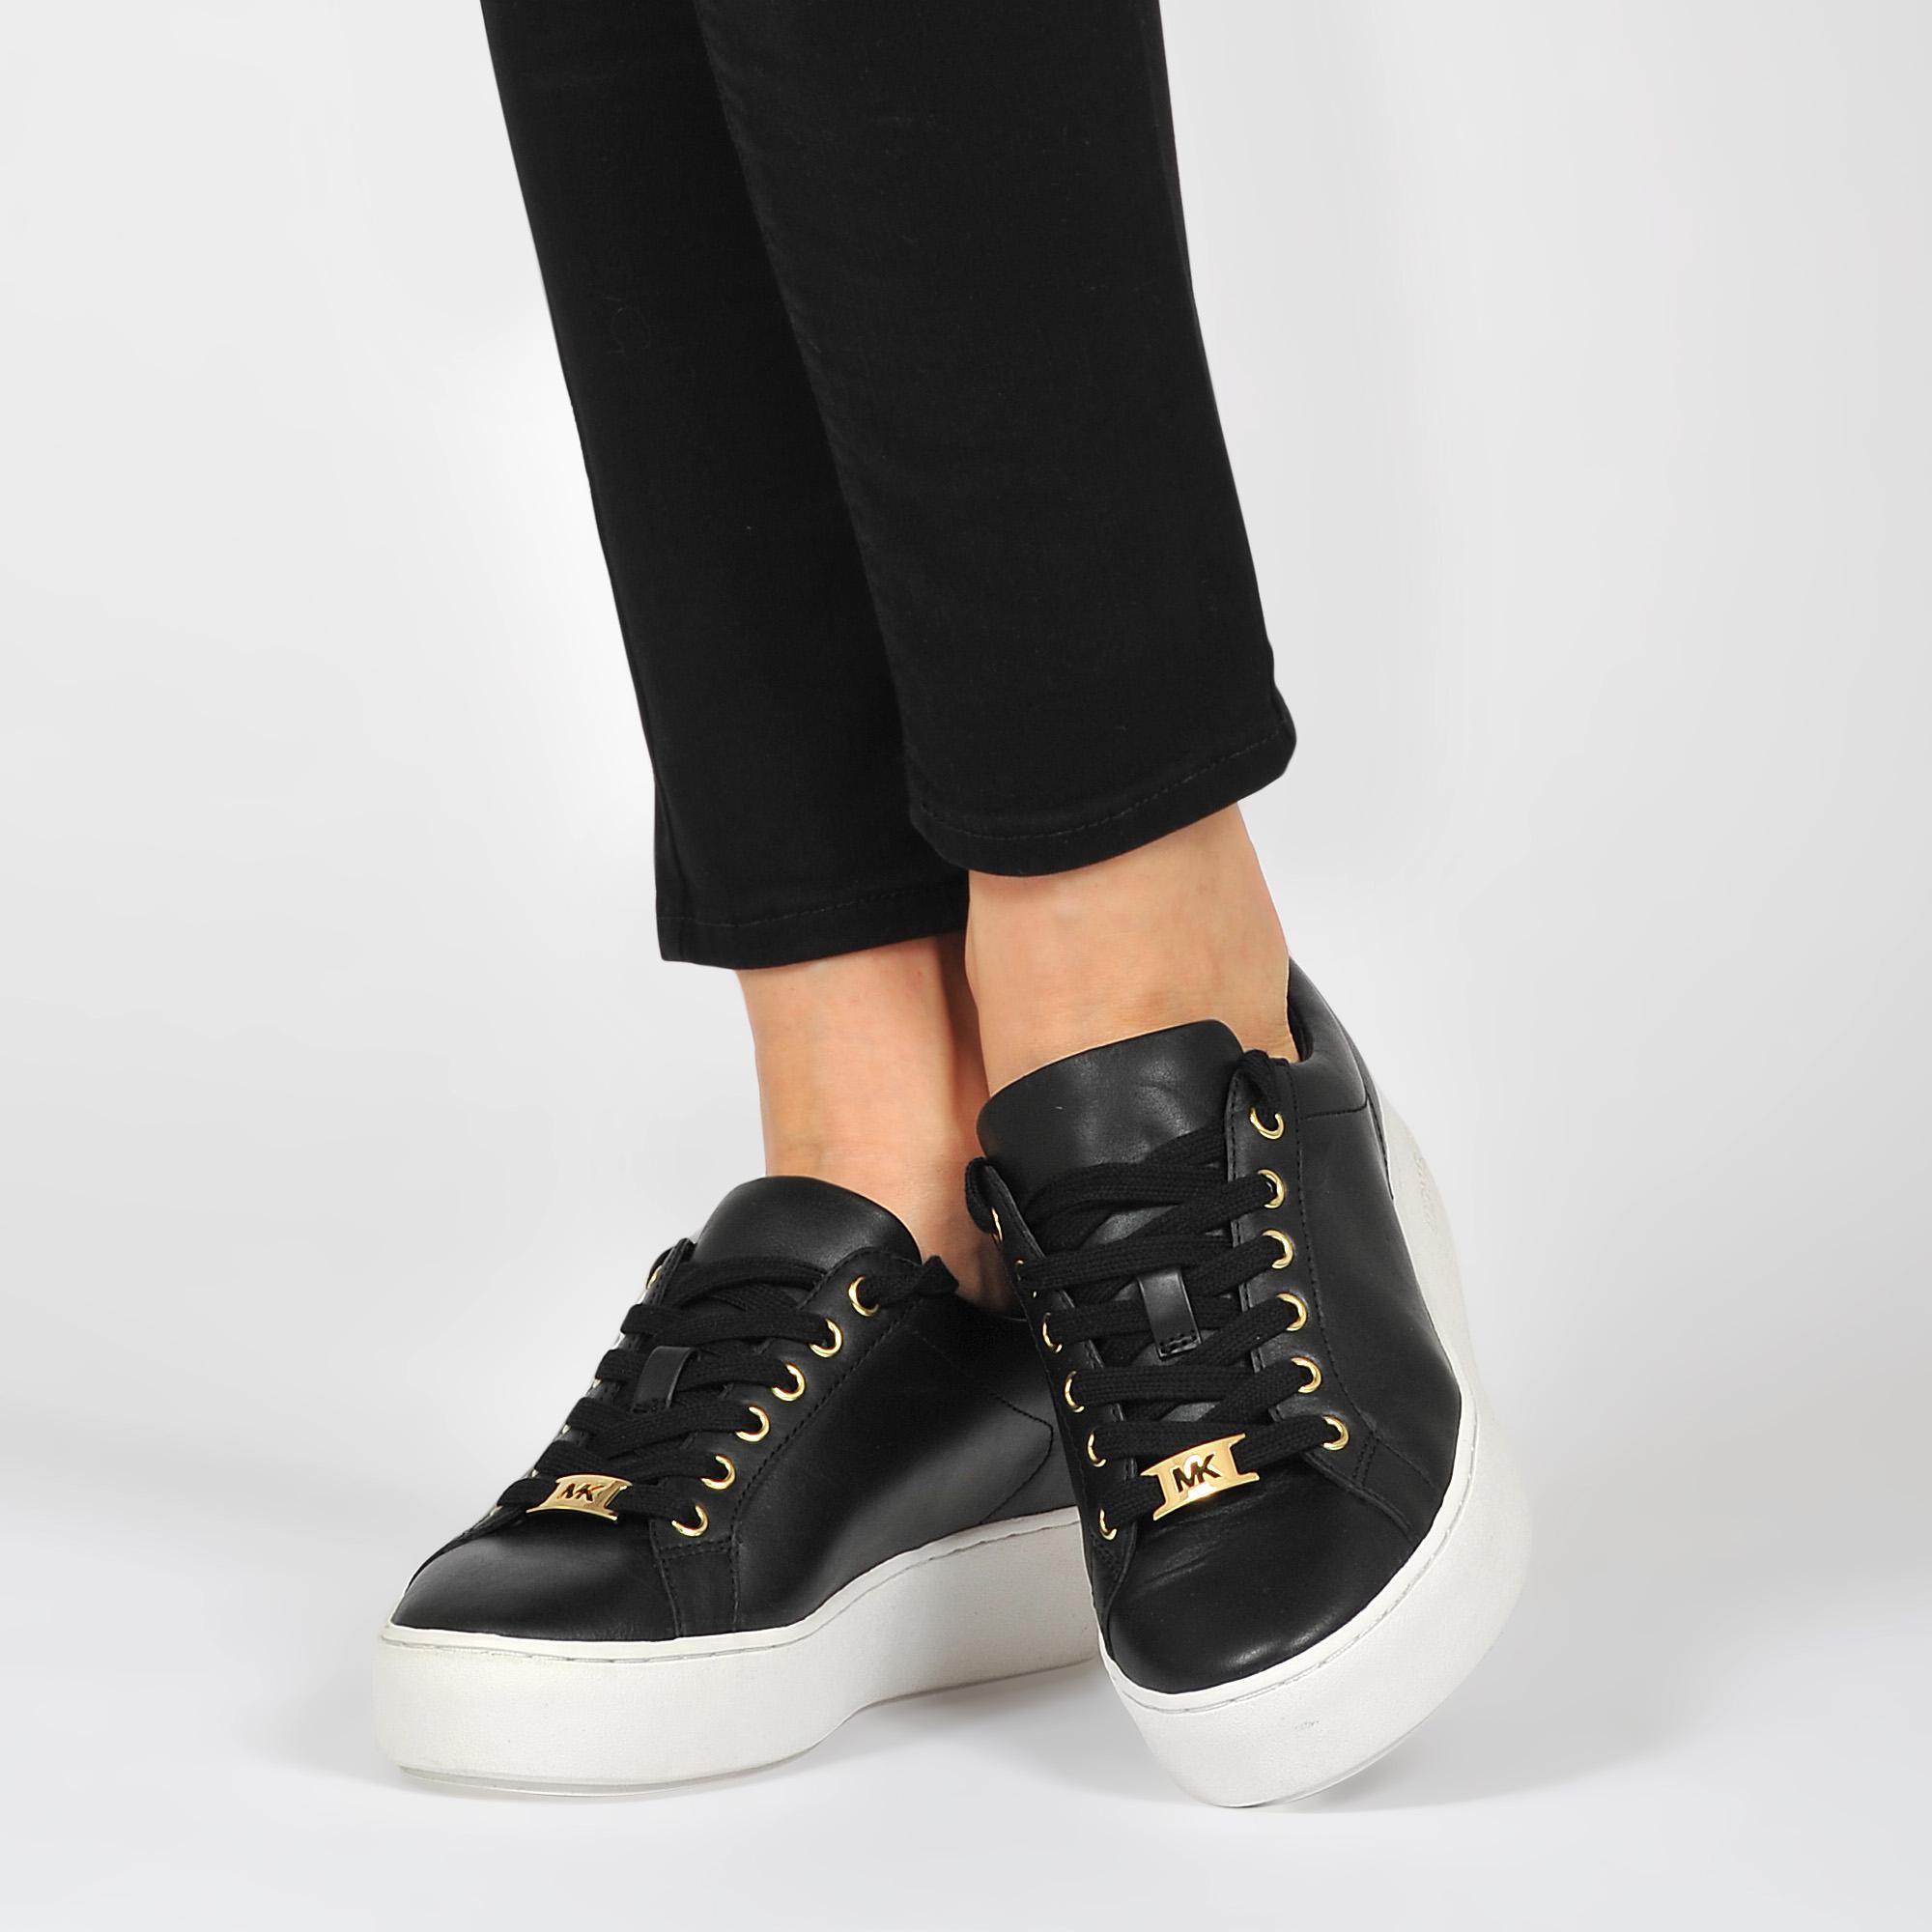 michael kors sneakers poppy lace up